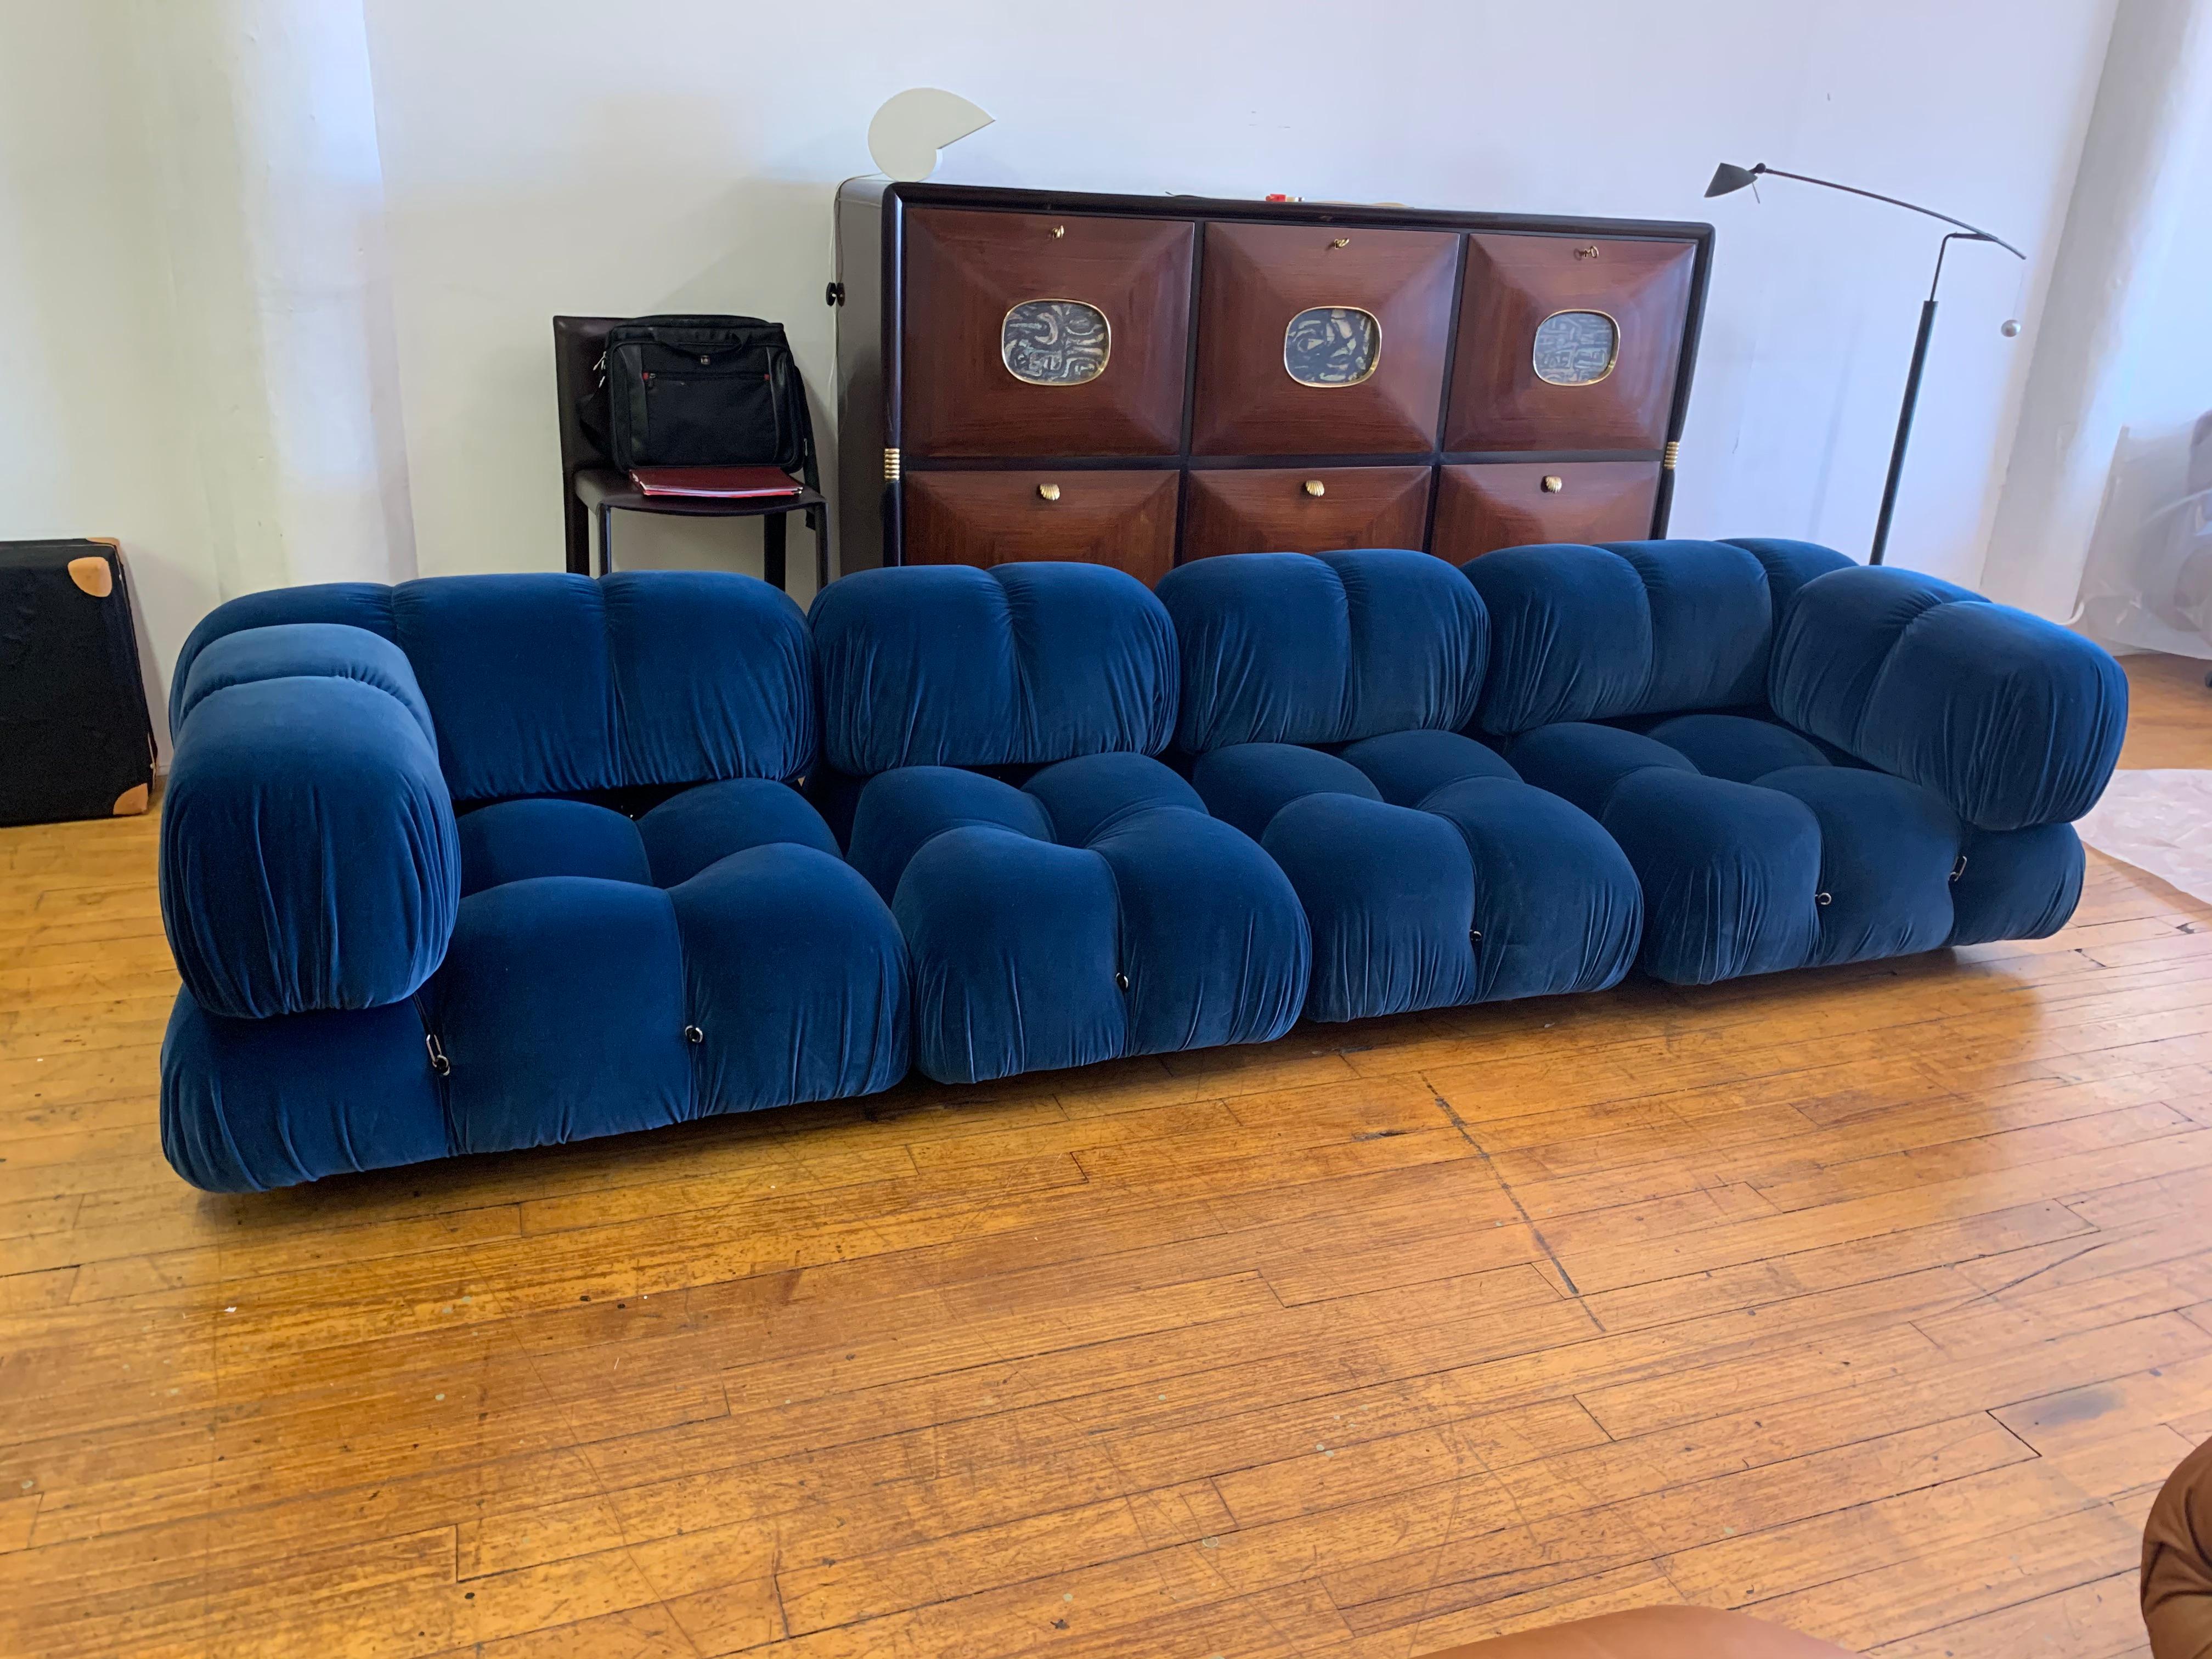 Authentic Camaleonda modular sofa by Mario Bellini for B&B Italia, 1970s, completely re-upholstered 100% Italian cotton Velvet in dark blue color. Restored and reupholstered with Velvet 100% cotton 580 gr. A rare composition with tall armrests so